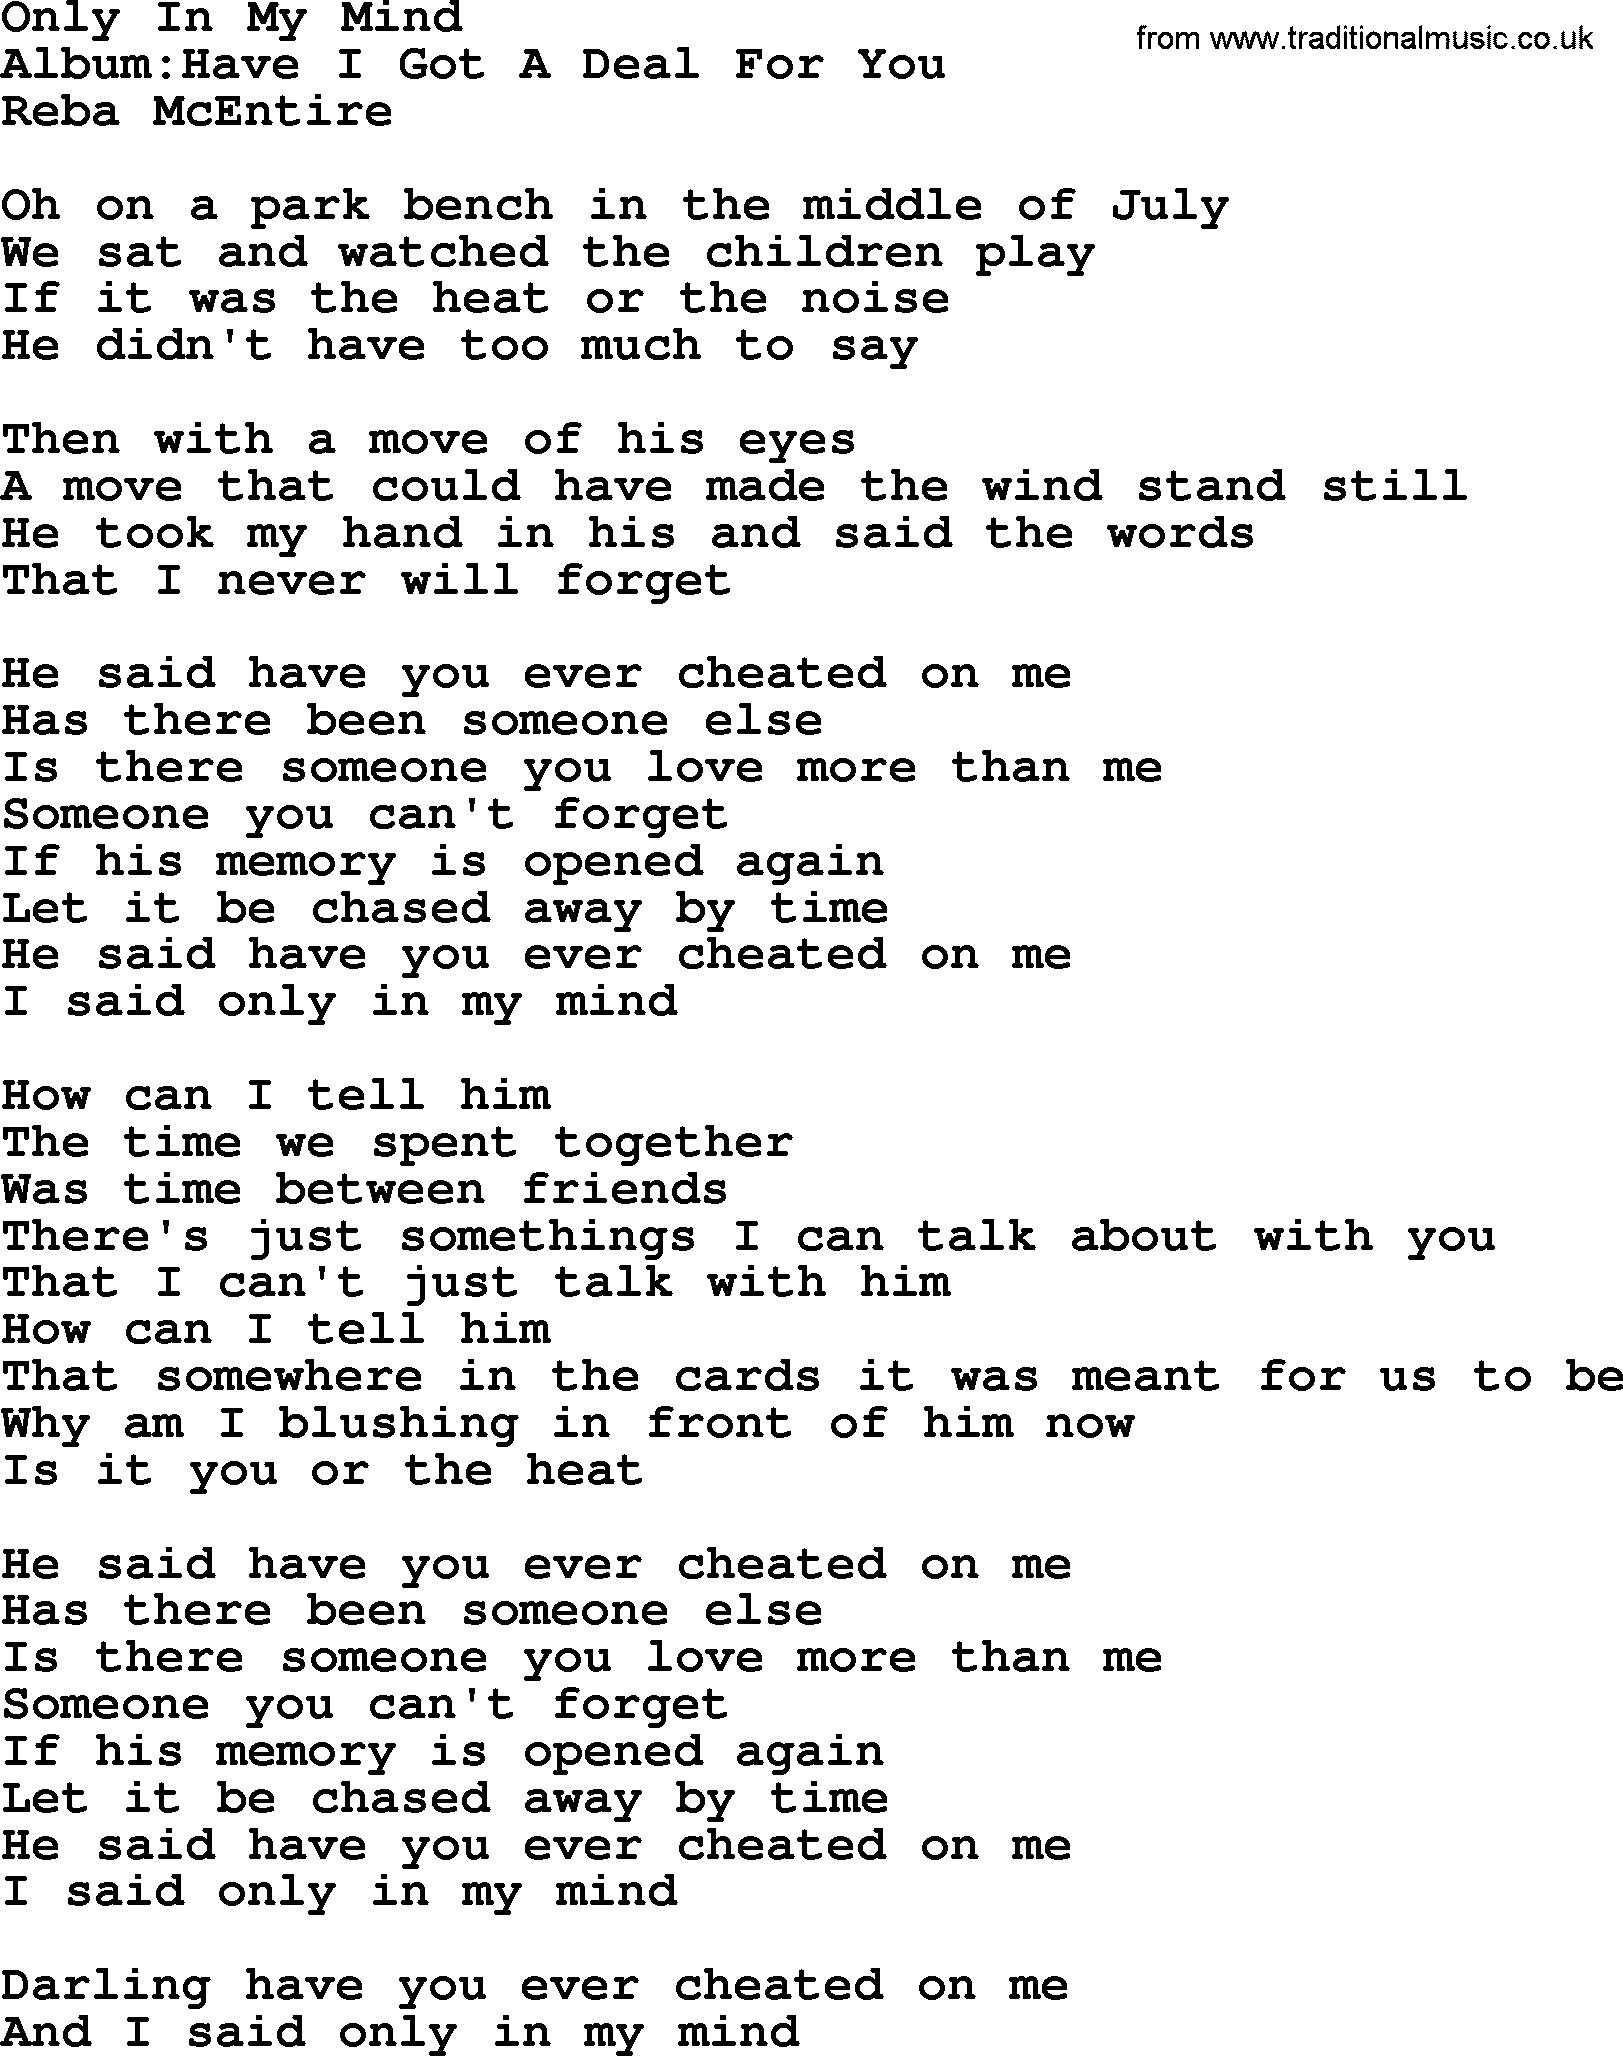 Reba McEntire song: Only In My Mind lyrics